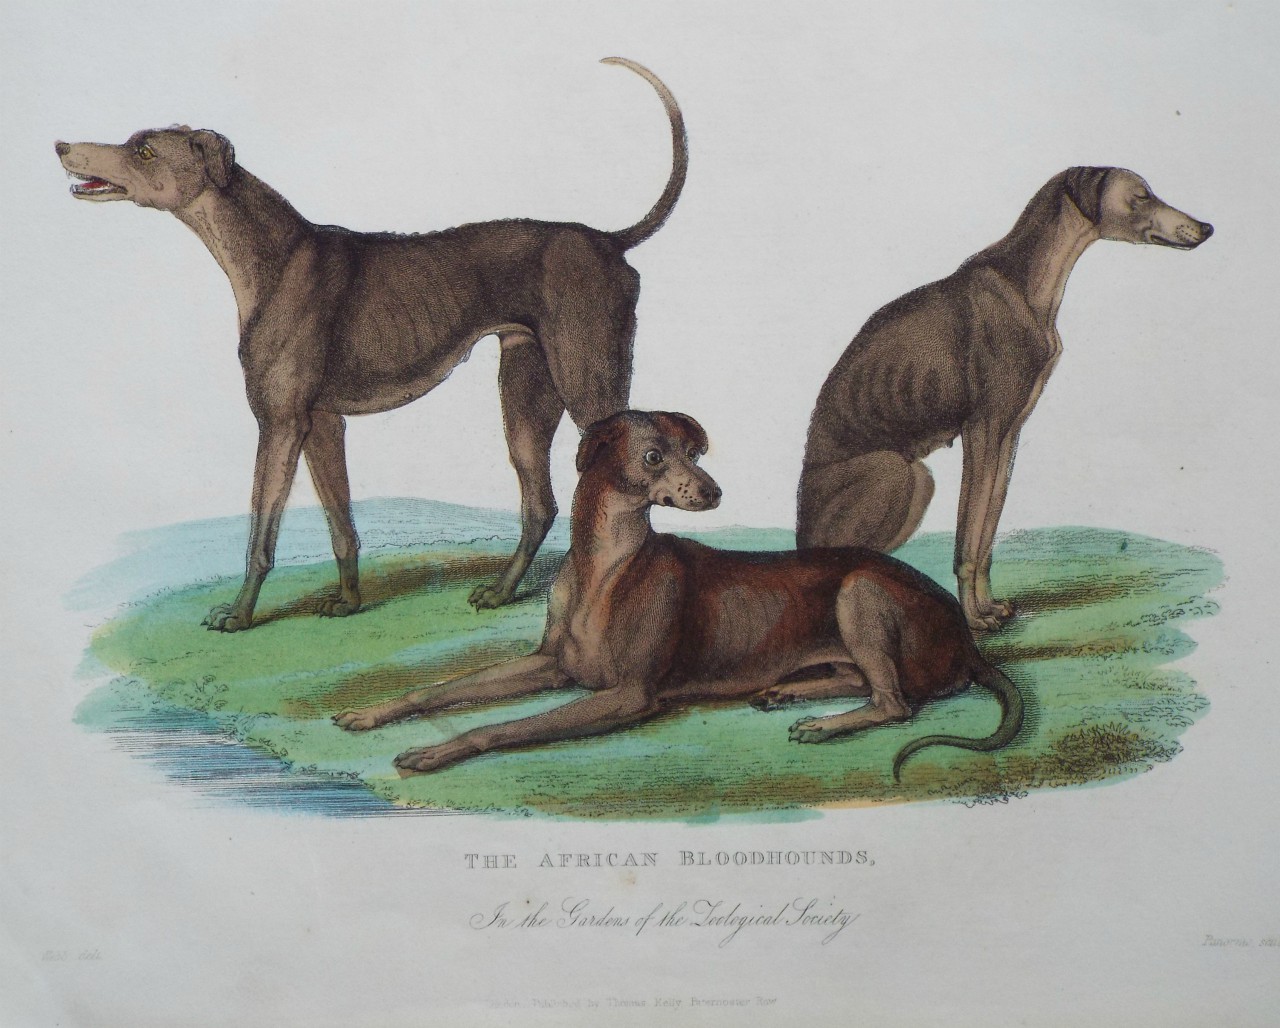 Print - The African Bloodhounds, In the Gardens of the Zoological Society. - 